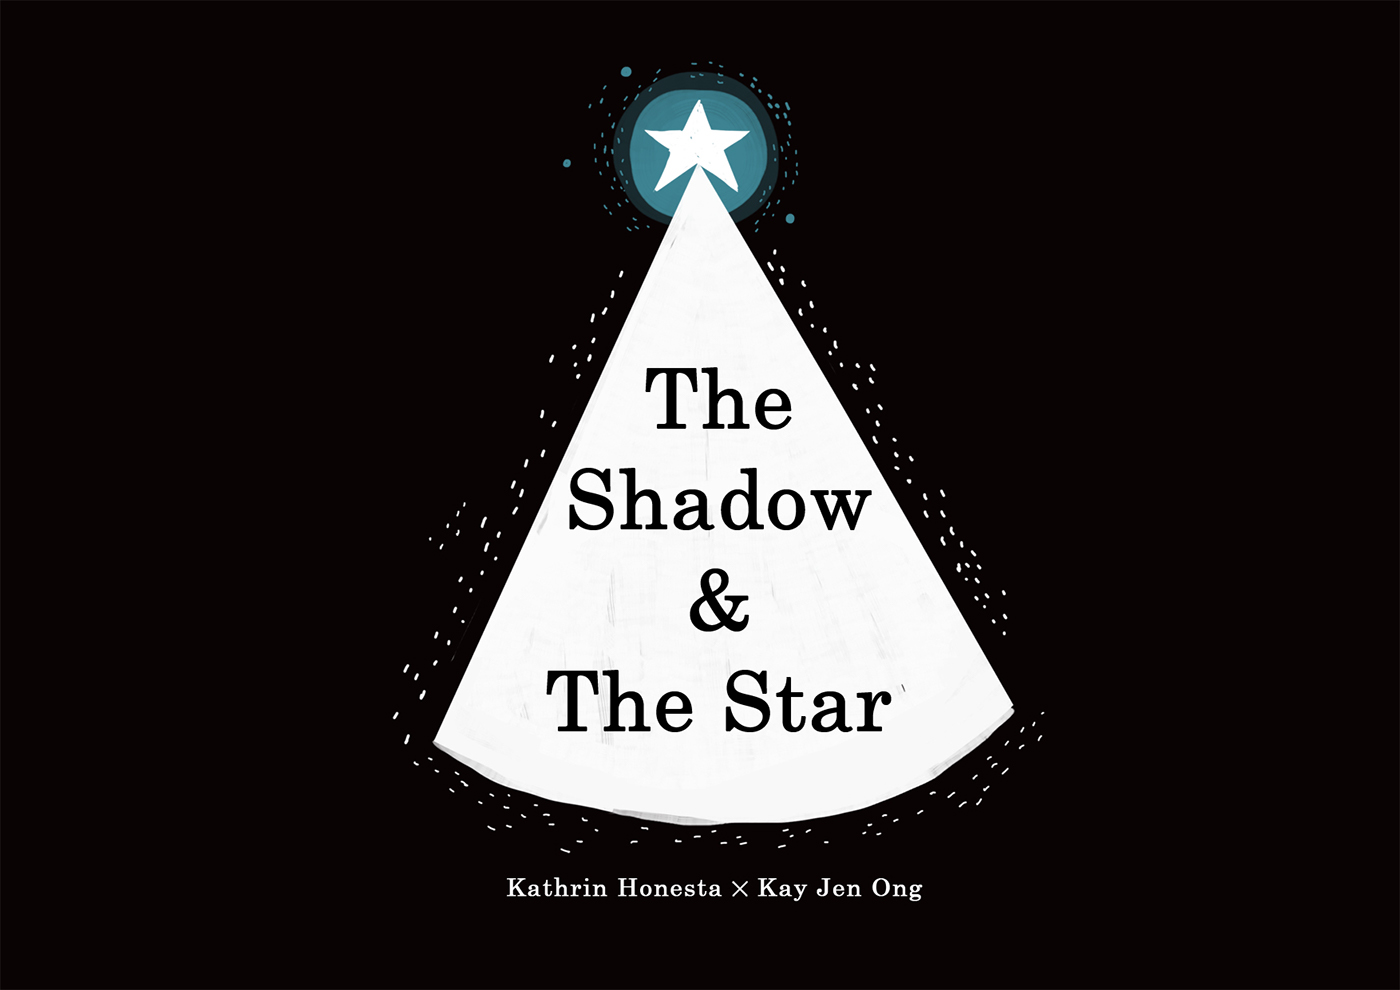 the shadow The Star Story Book CHILDREN STORY children illustration theshadowandthestar bed time story loneliness christmas project